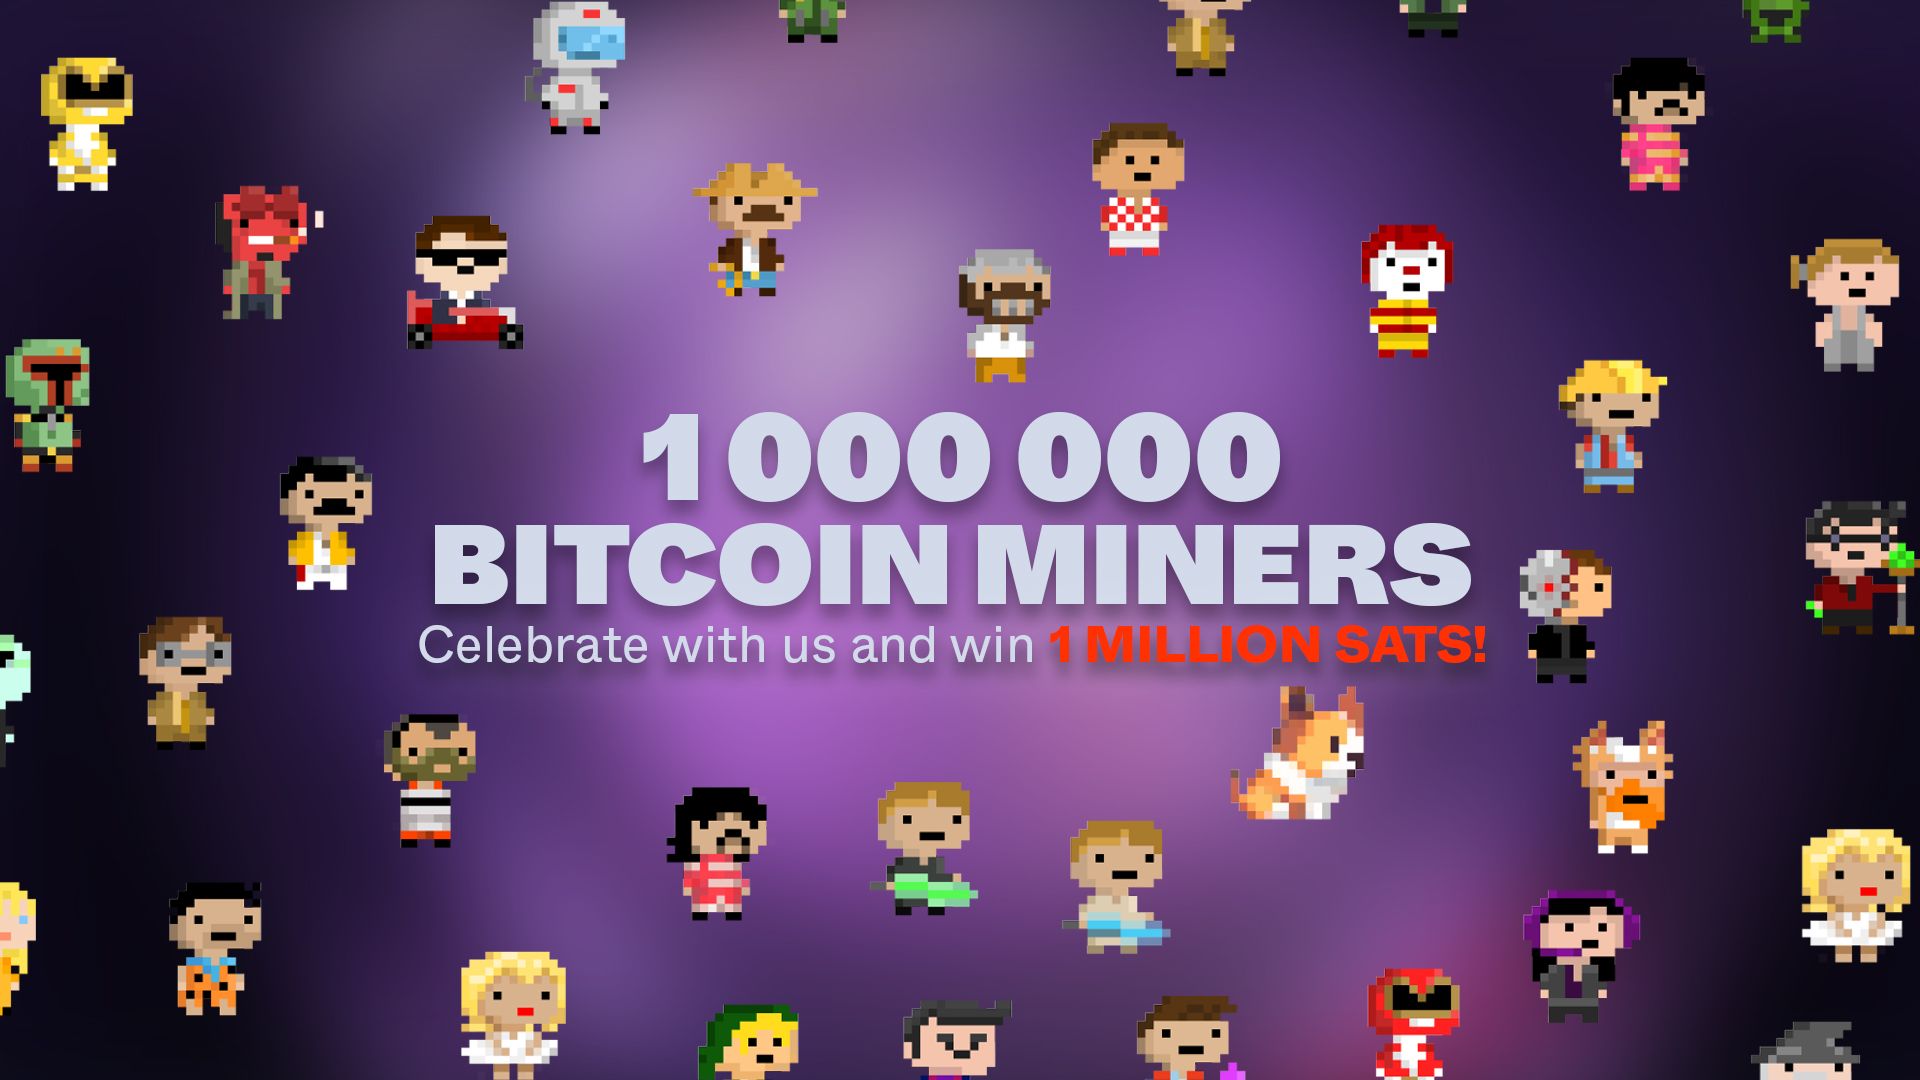 Fumb Games crosses a million players for Bitcoin Miner simulation game | VentureBeat